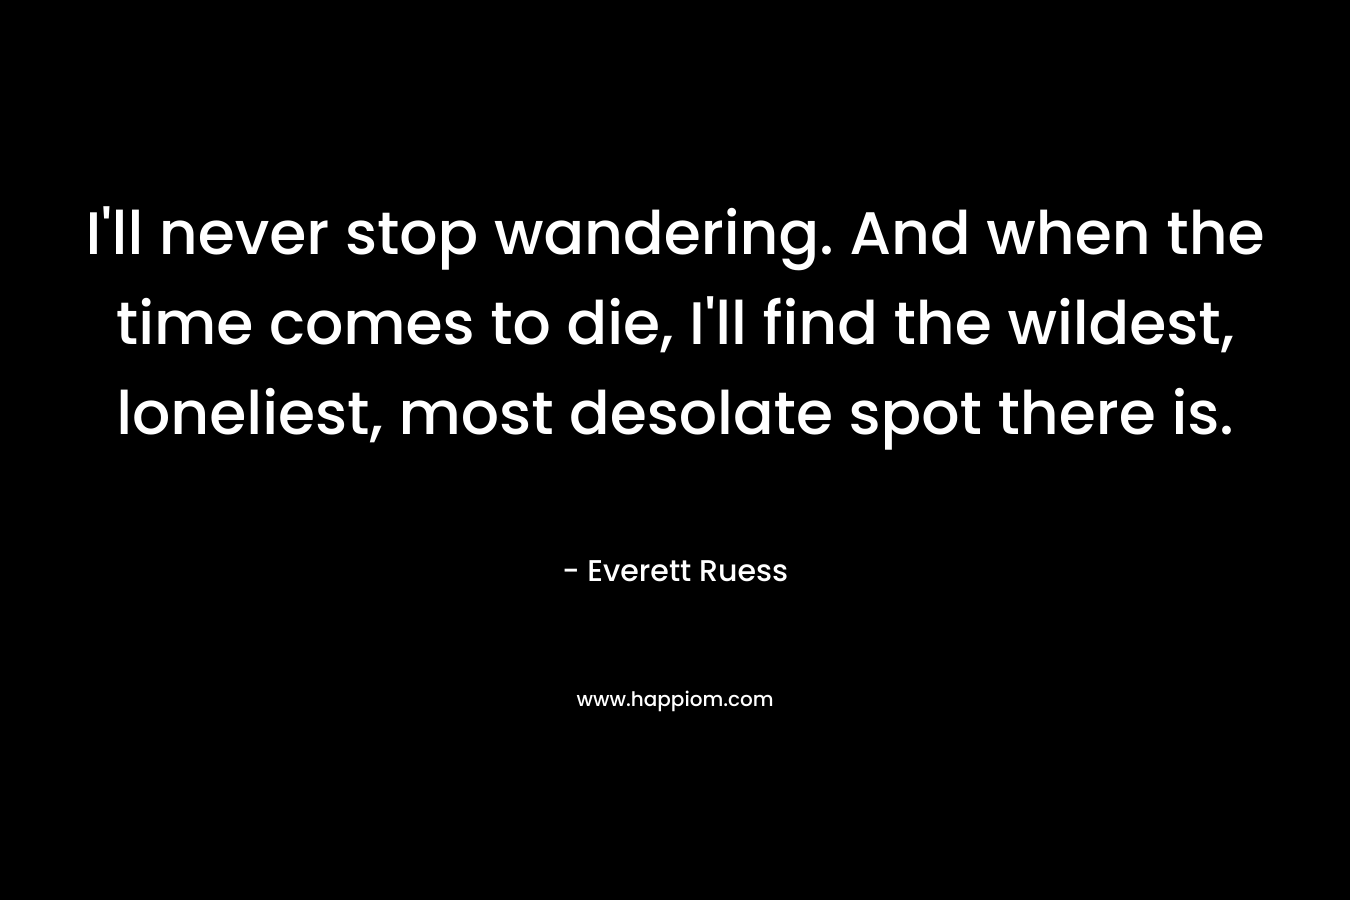 I'll never stop wandering. And when the time comes to die, I'll find the wildest, loneliest, most desolate spot there is.